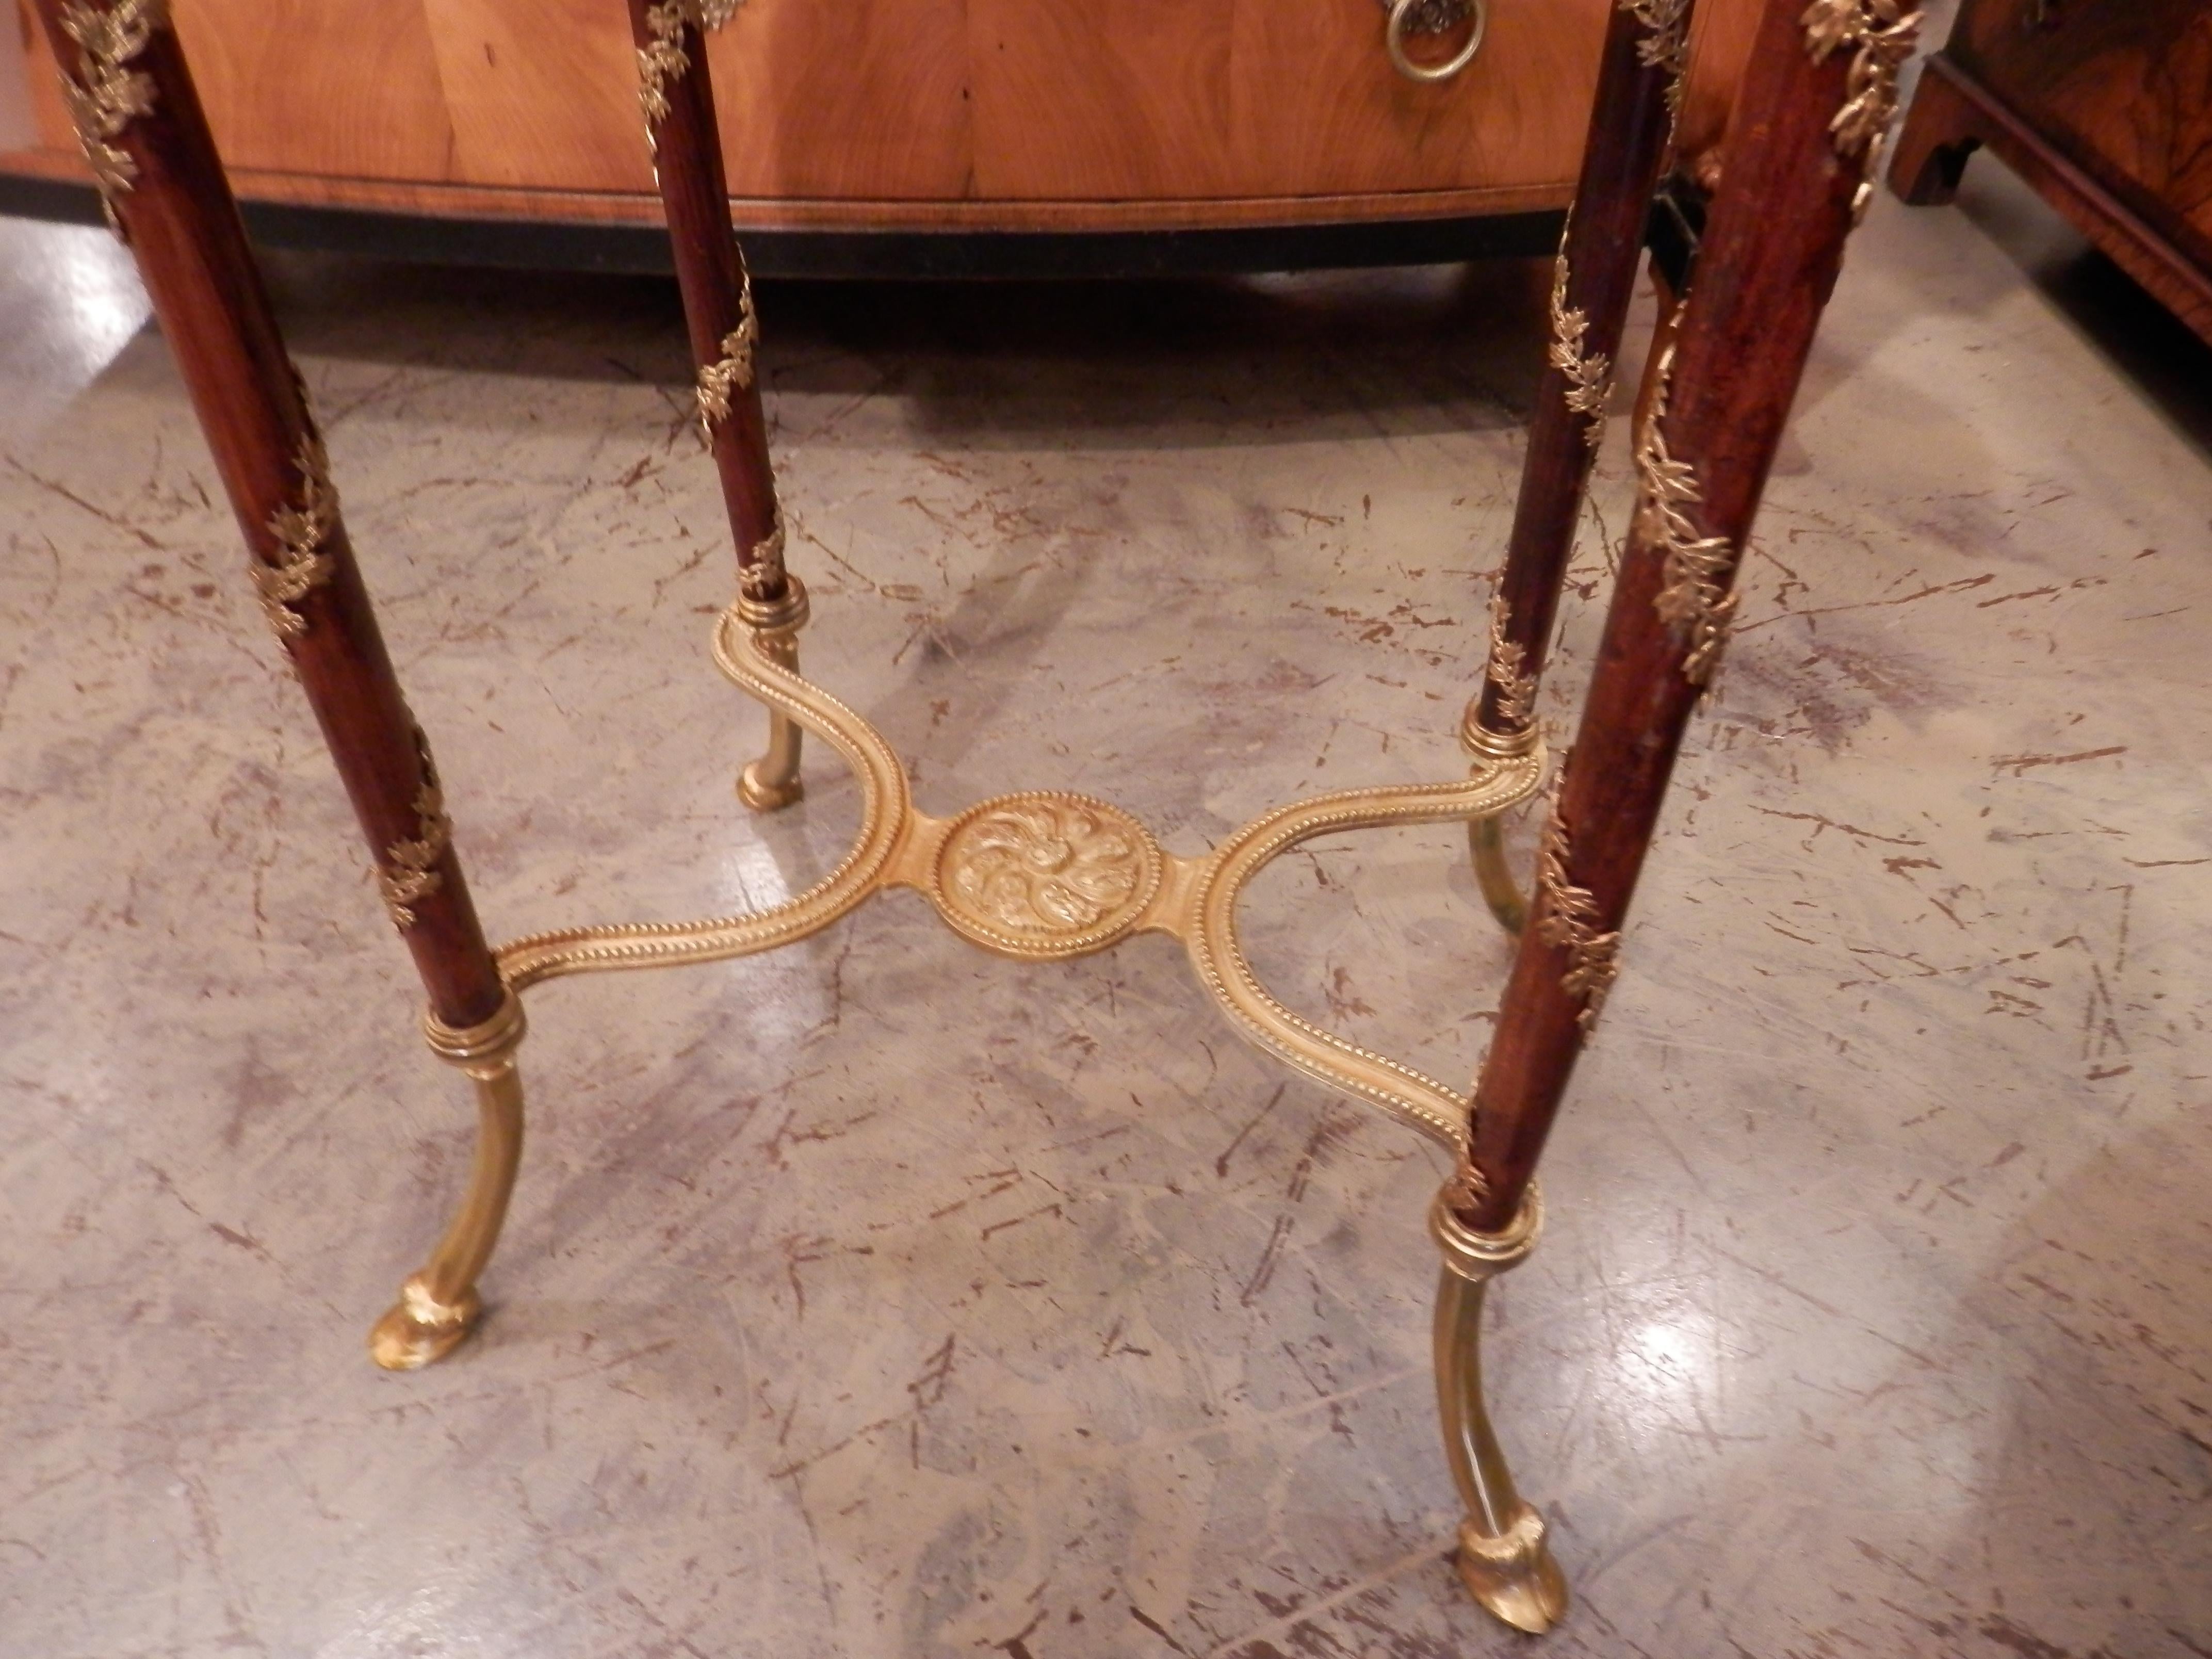 Beautiful 19th century fine marble-top and gilt bronze guéridon with pawed feet and a gilt bronze and mahogany gilt bronze wrapped legs